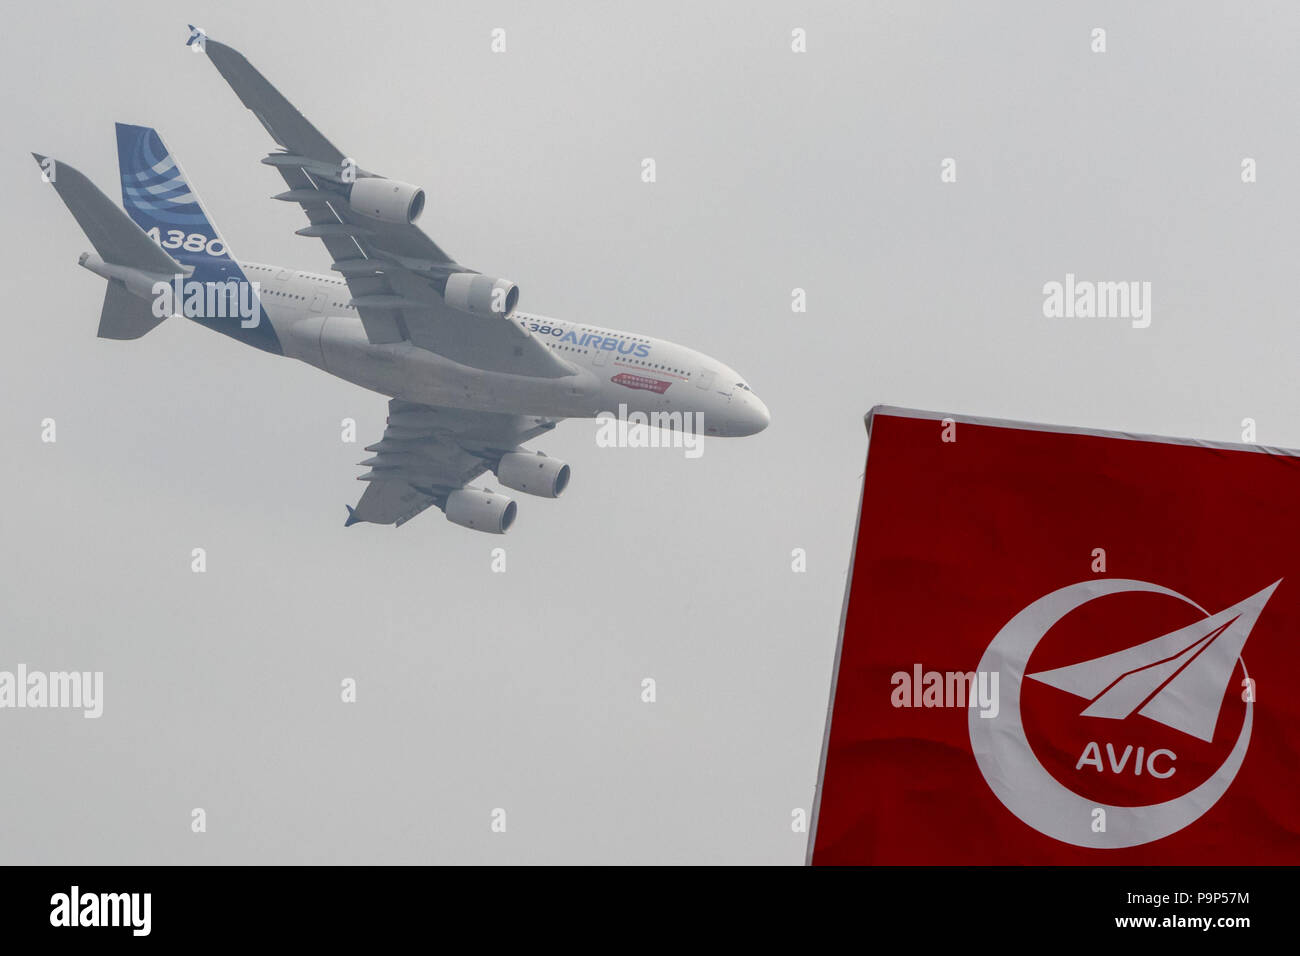 The Airbus A380 widebody civil jet airplane flies over the logo of AVIC (Aviation Industry Corporation of China) as seen at the China Airshow-2014, Zh Stock Photo